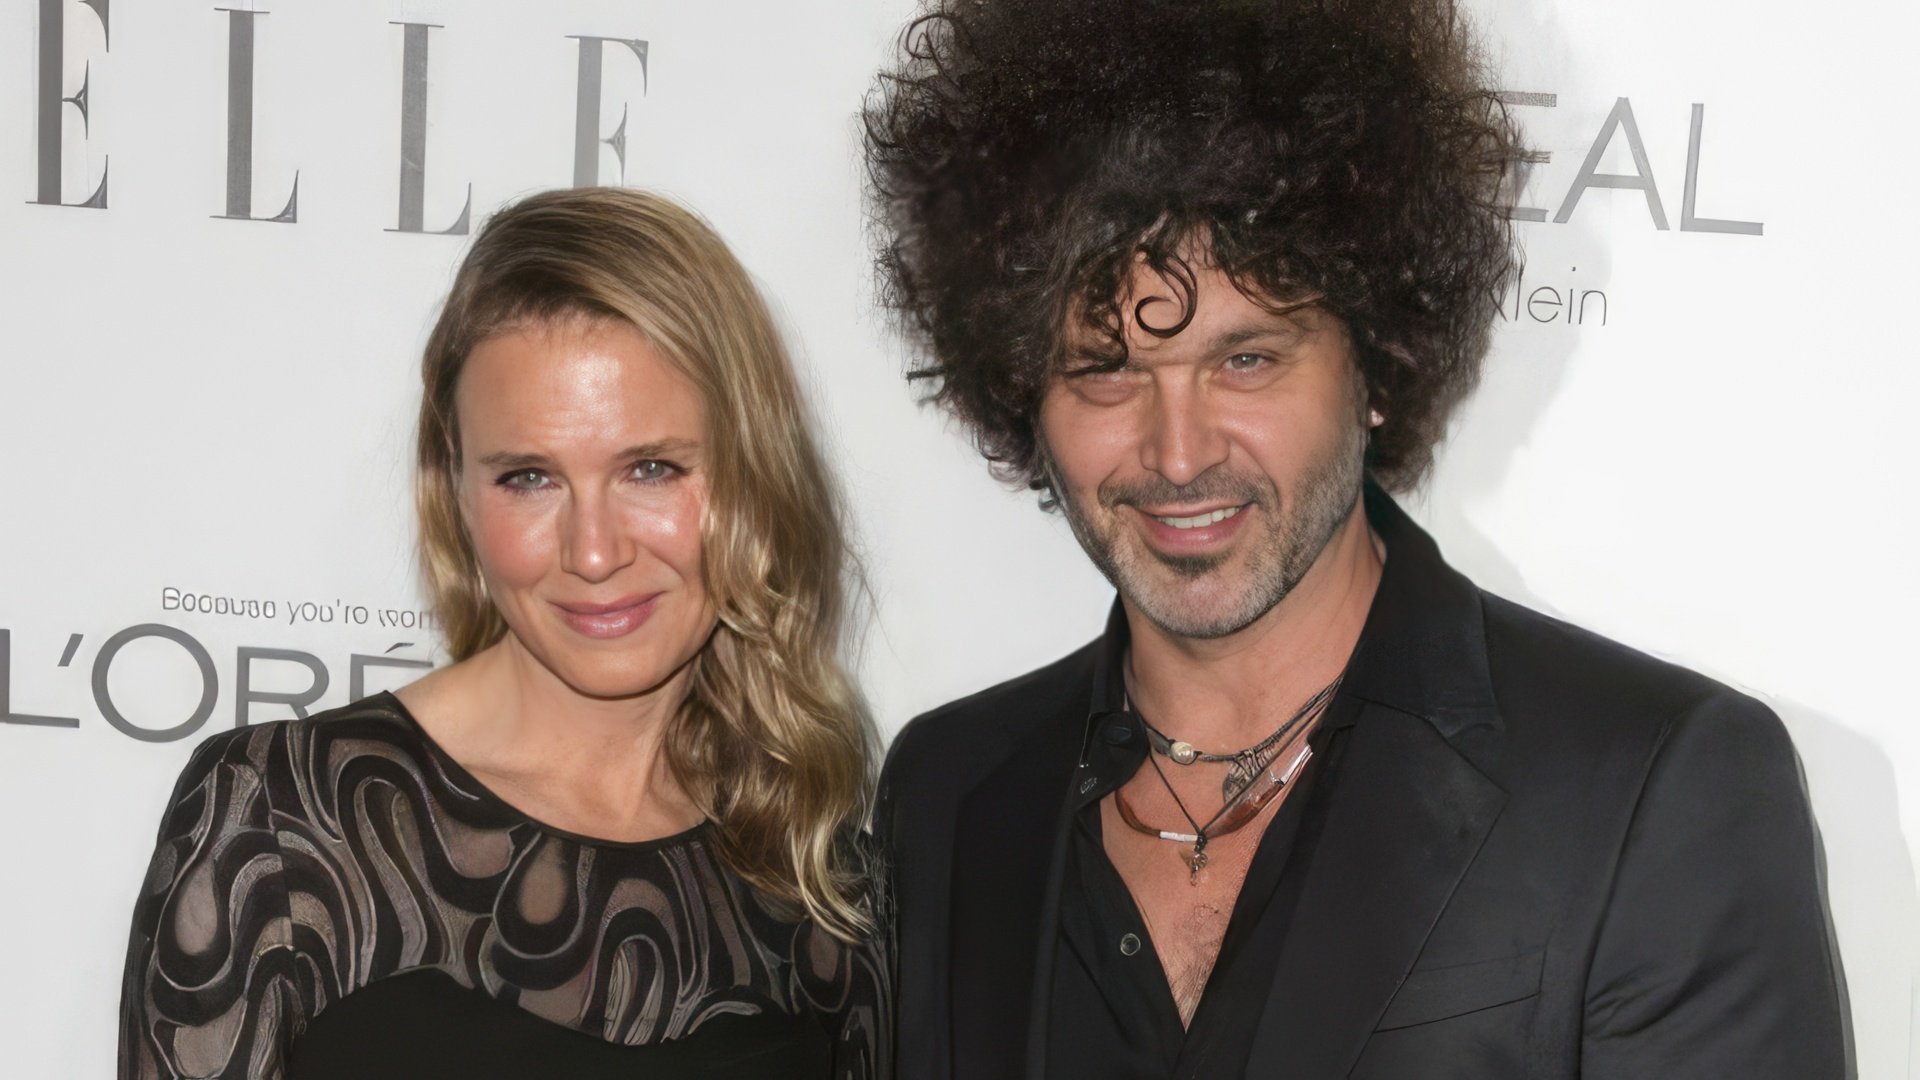 Pictured: Renée Zellweger and Doyle Bramhall